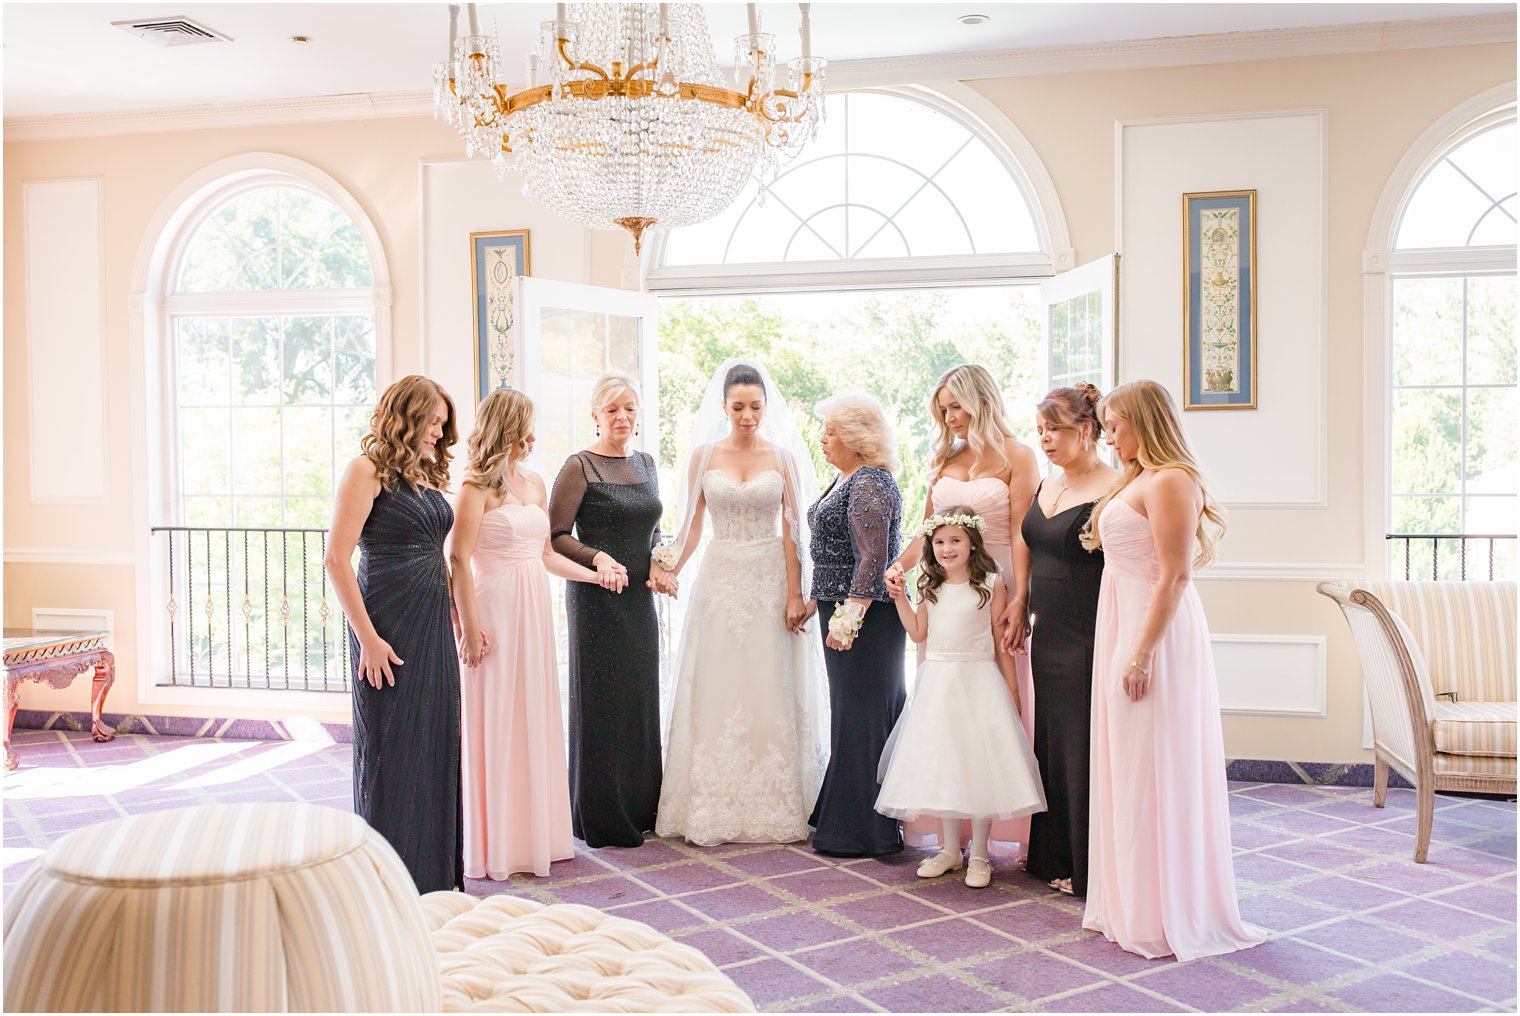 Bride praying with her family and bridesmaids